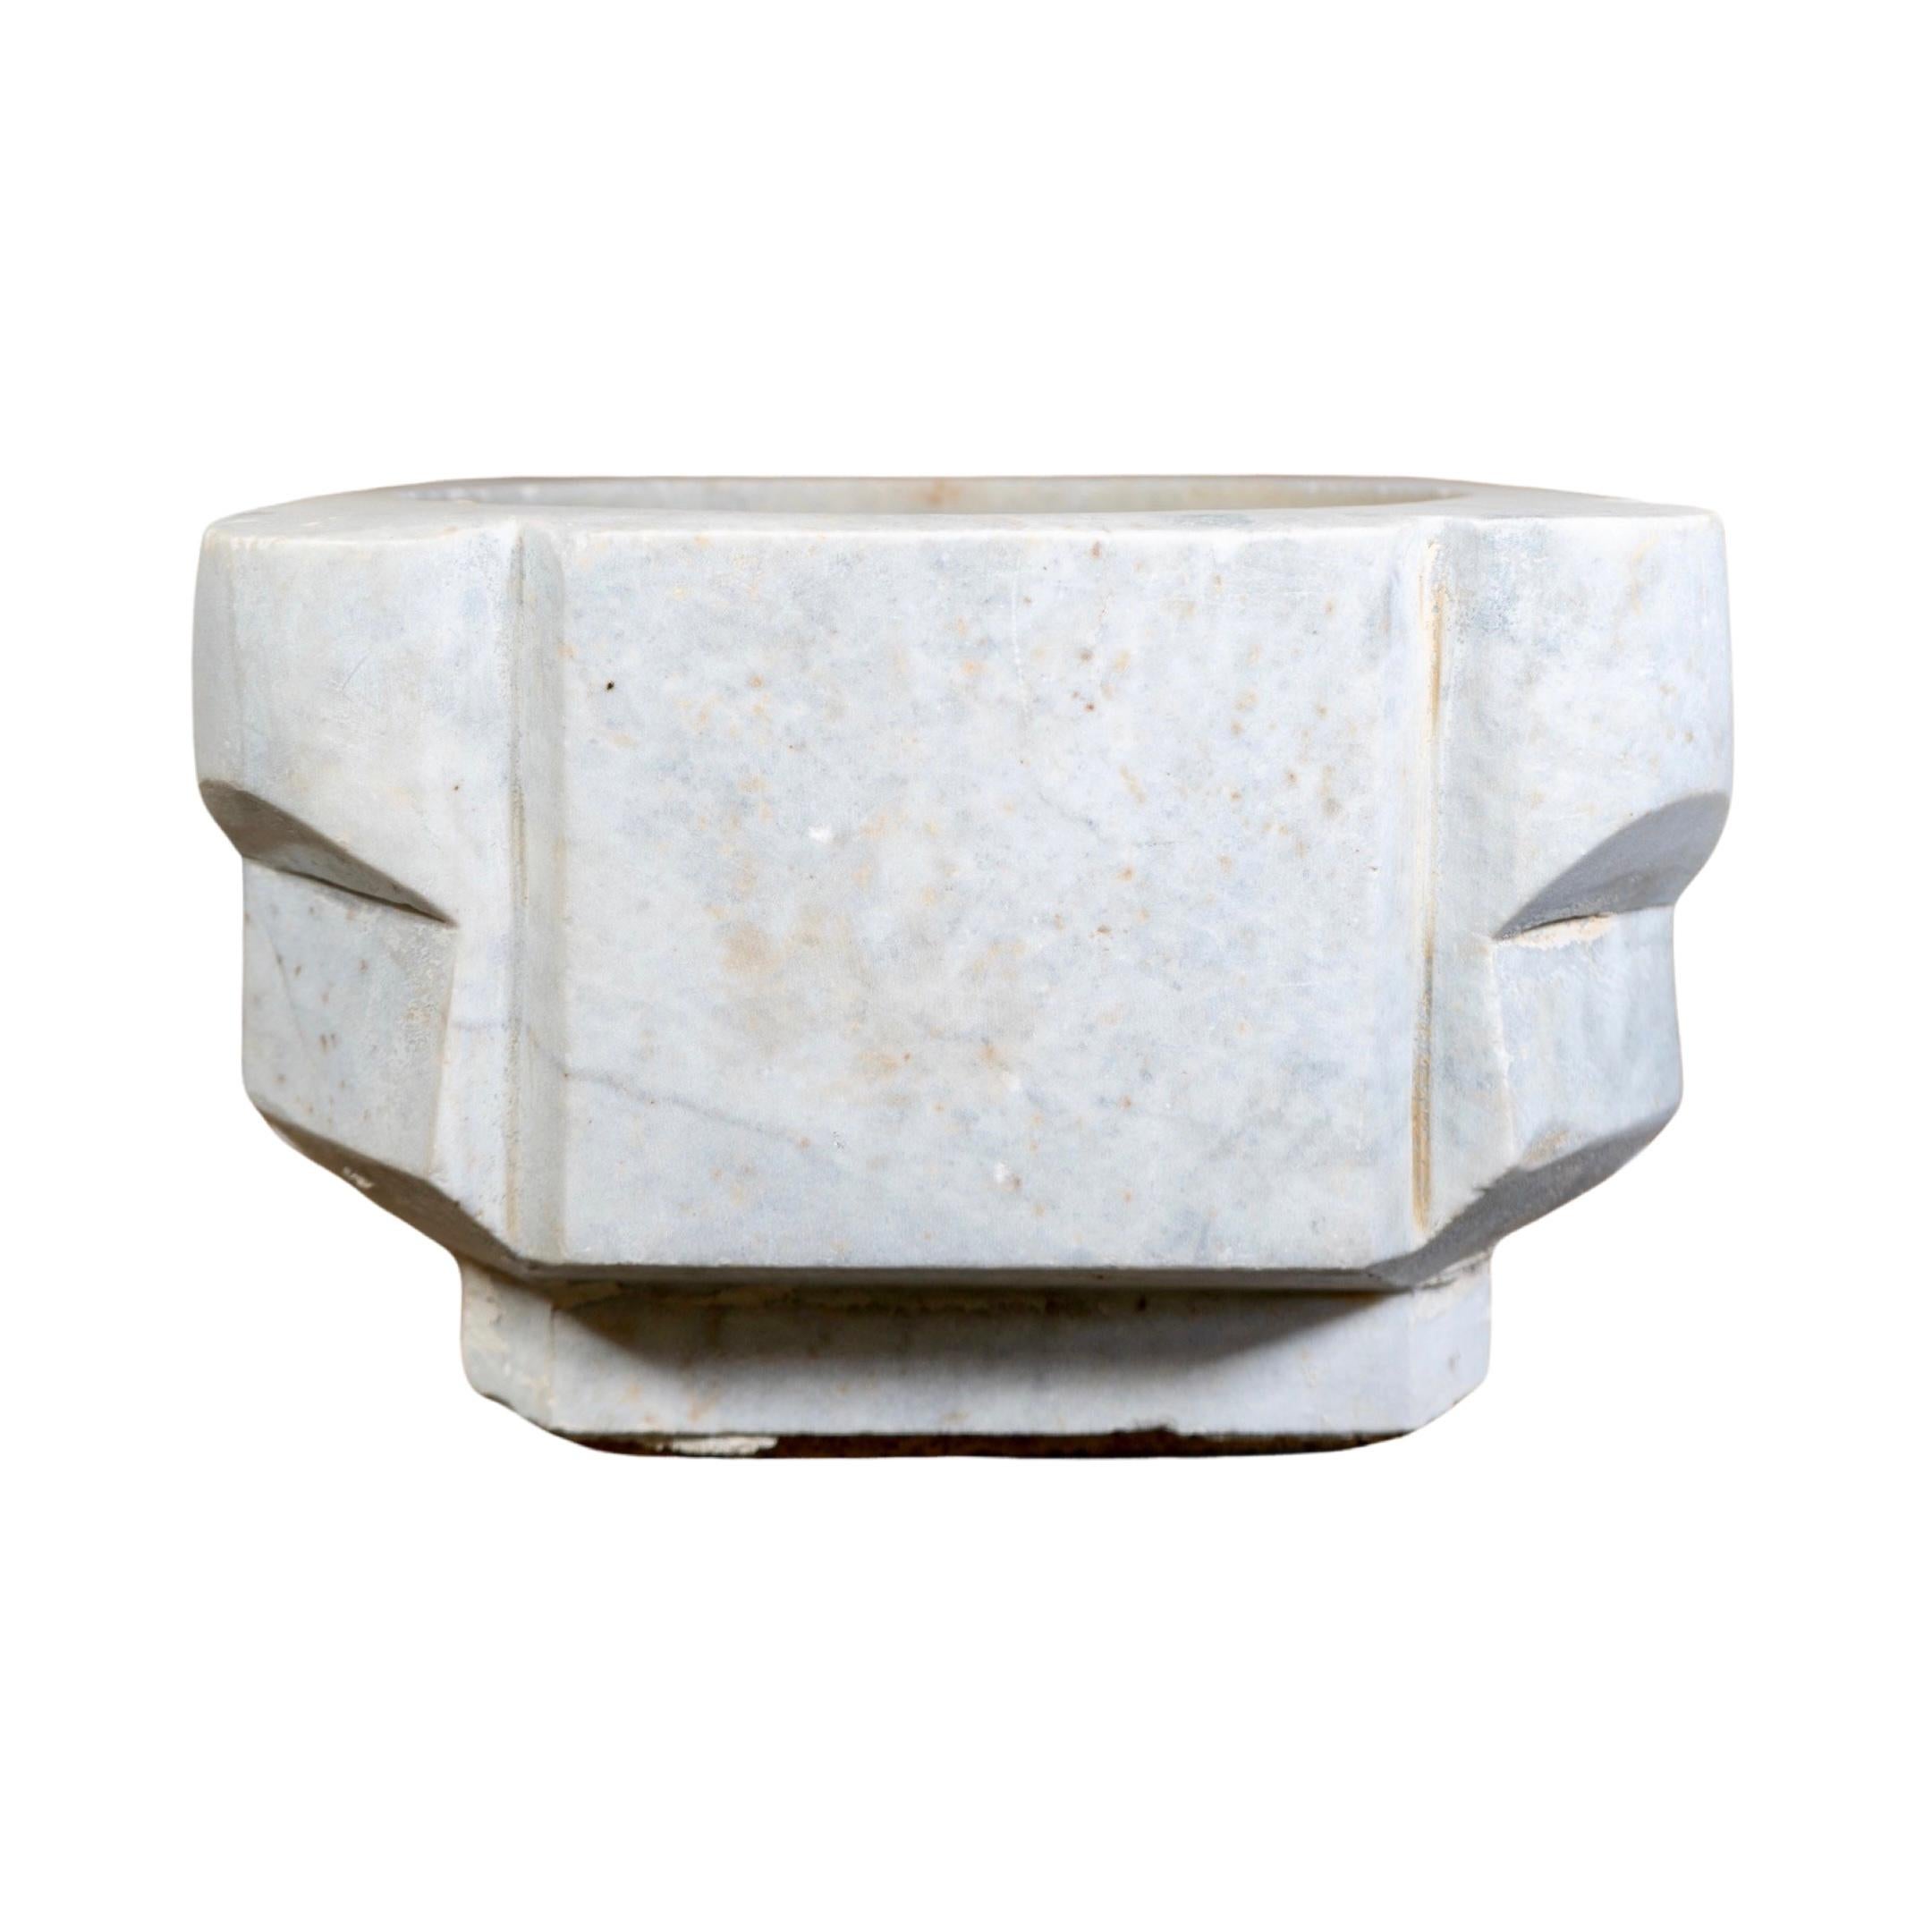 A classic 18th century French White Marble Sink for timeless beauty. Its genuine marble construction is durable and will last for years, making it an excellent choice for your bathroom.